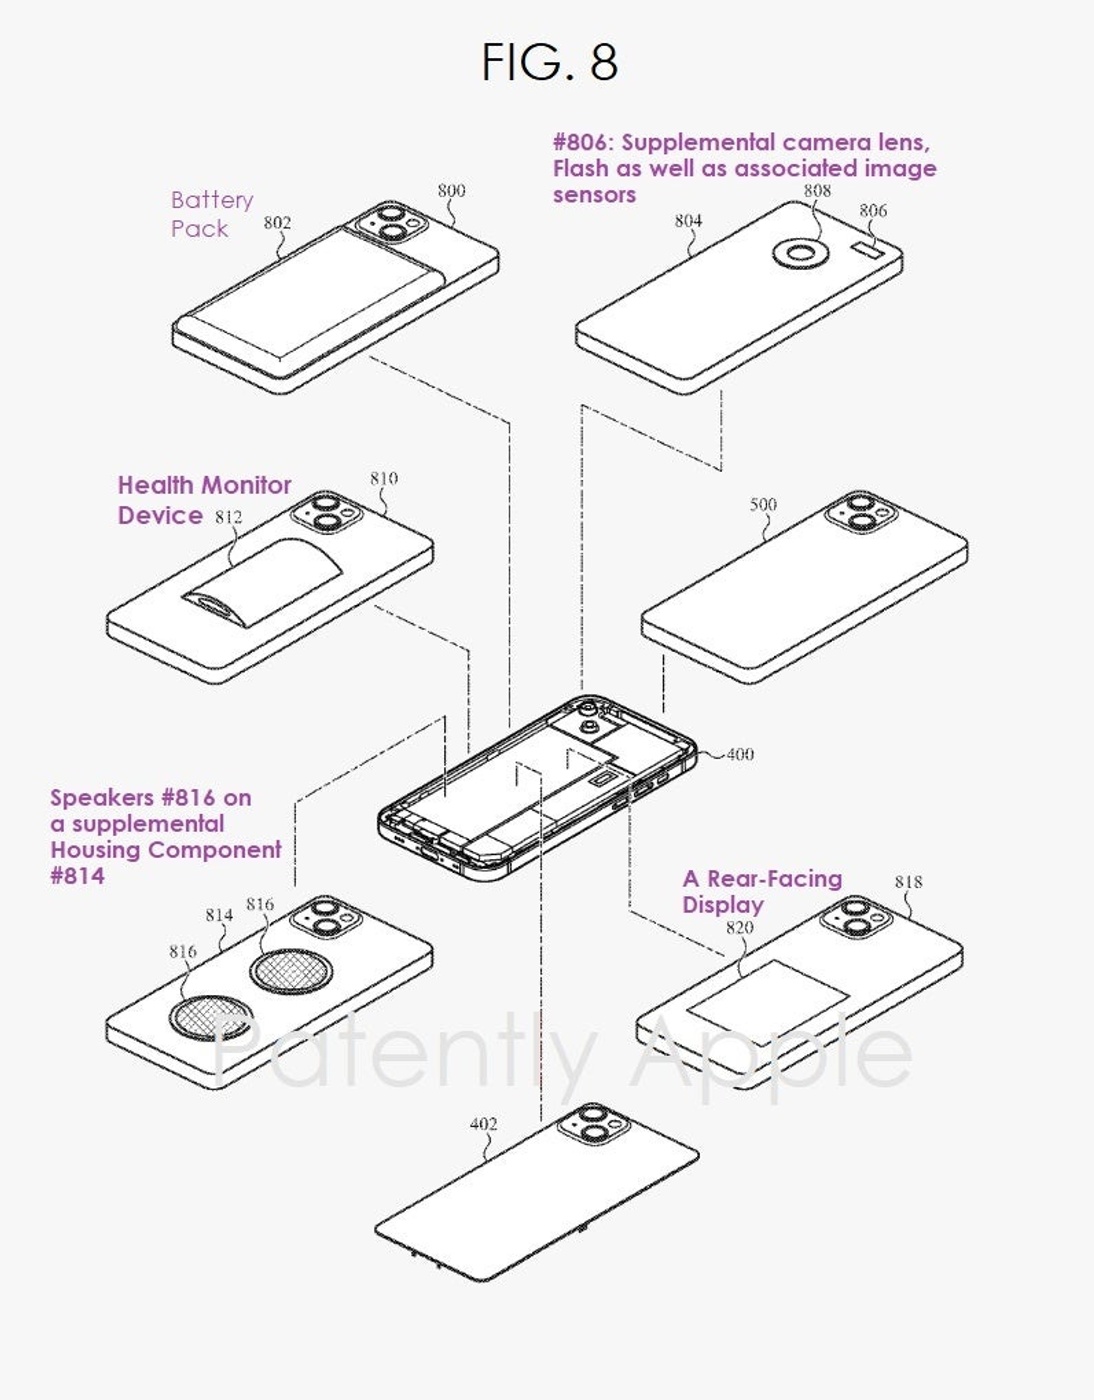 Innovative Patent from Apple: iPhones to Feature Interchangeable Back Covers